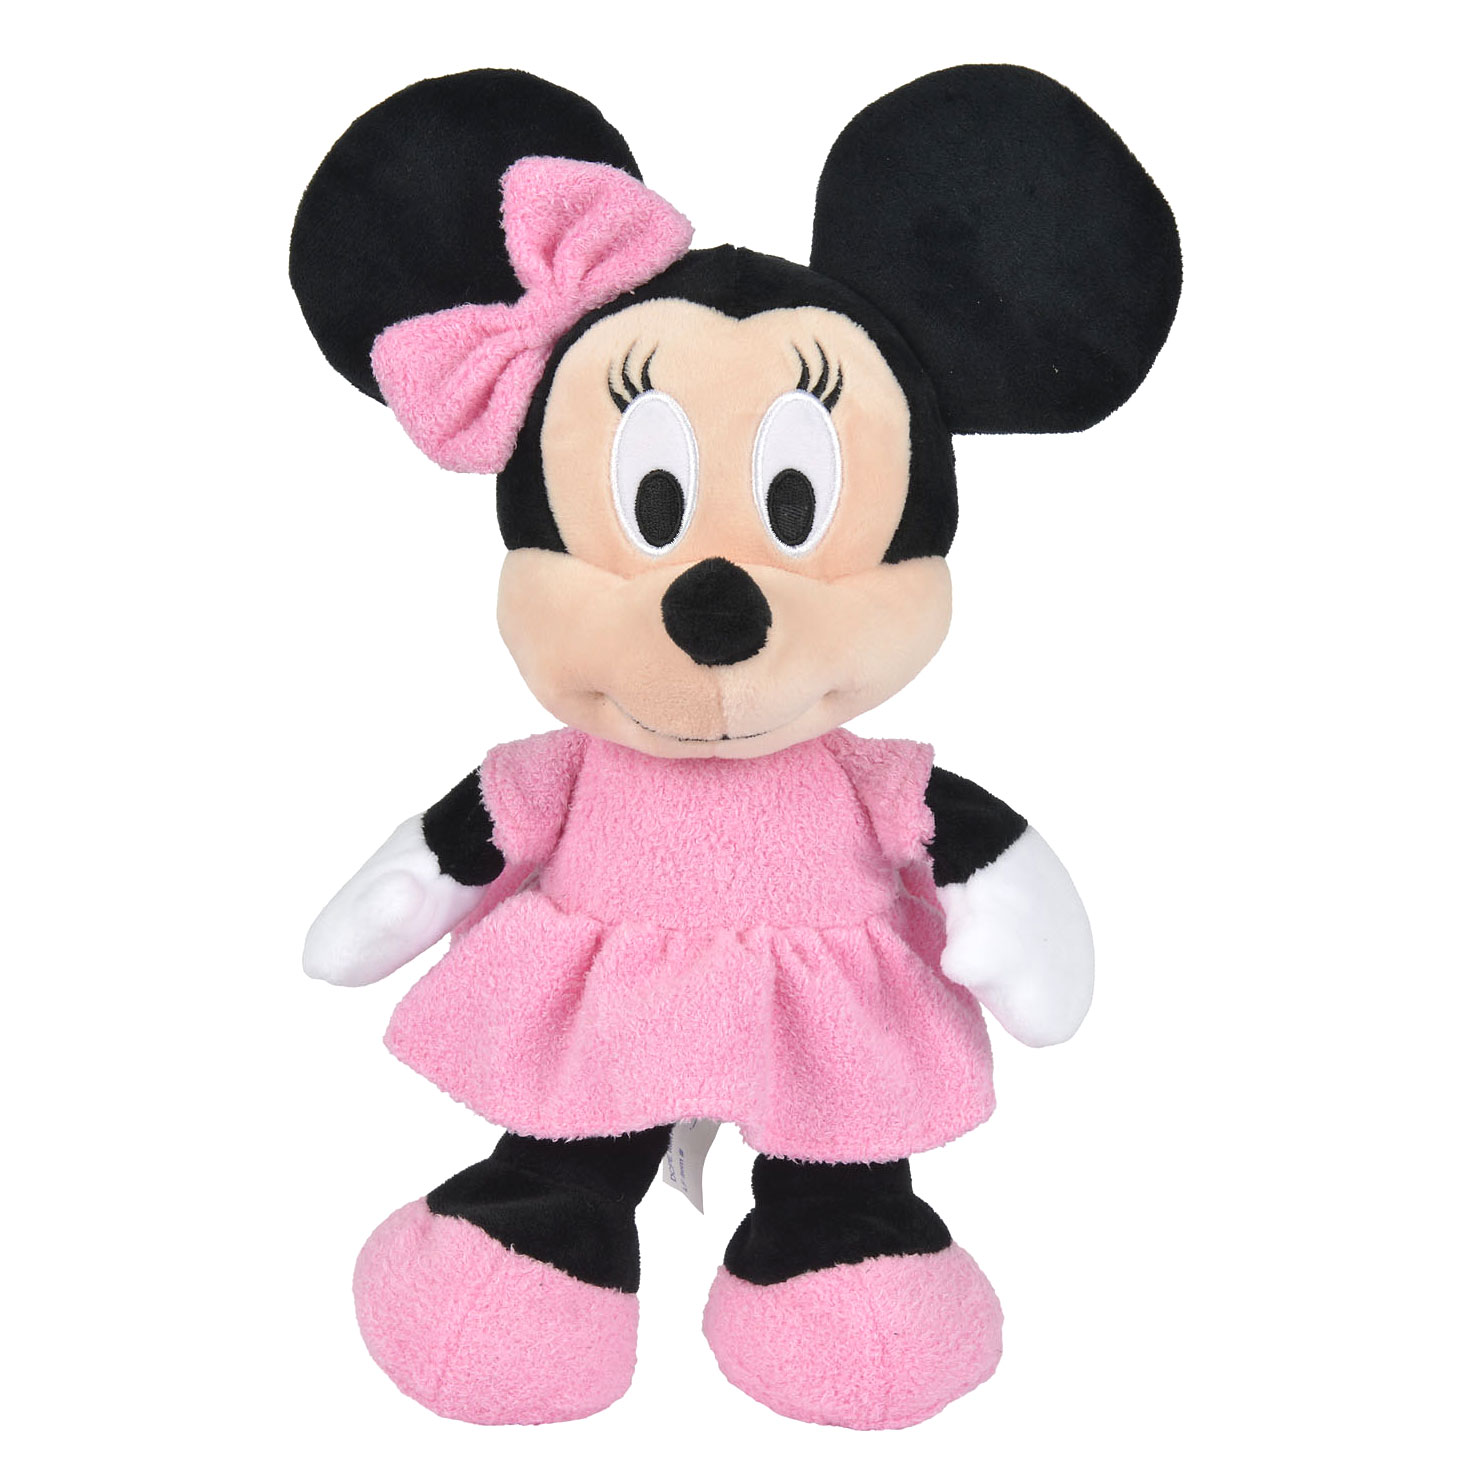 Alice Nutteloos tiener Pluchen Knuffel Minnie Mouse | Thimble Toys